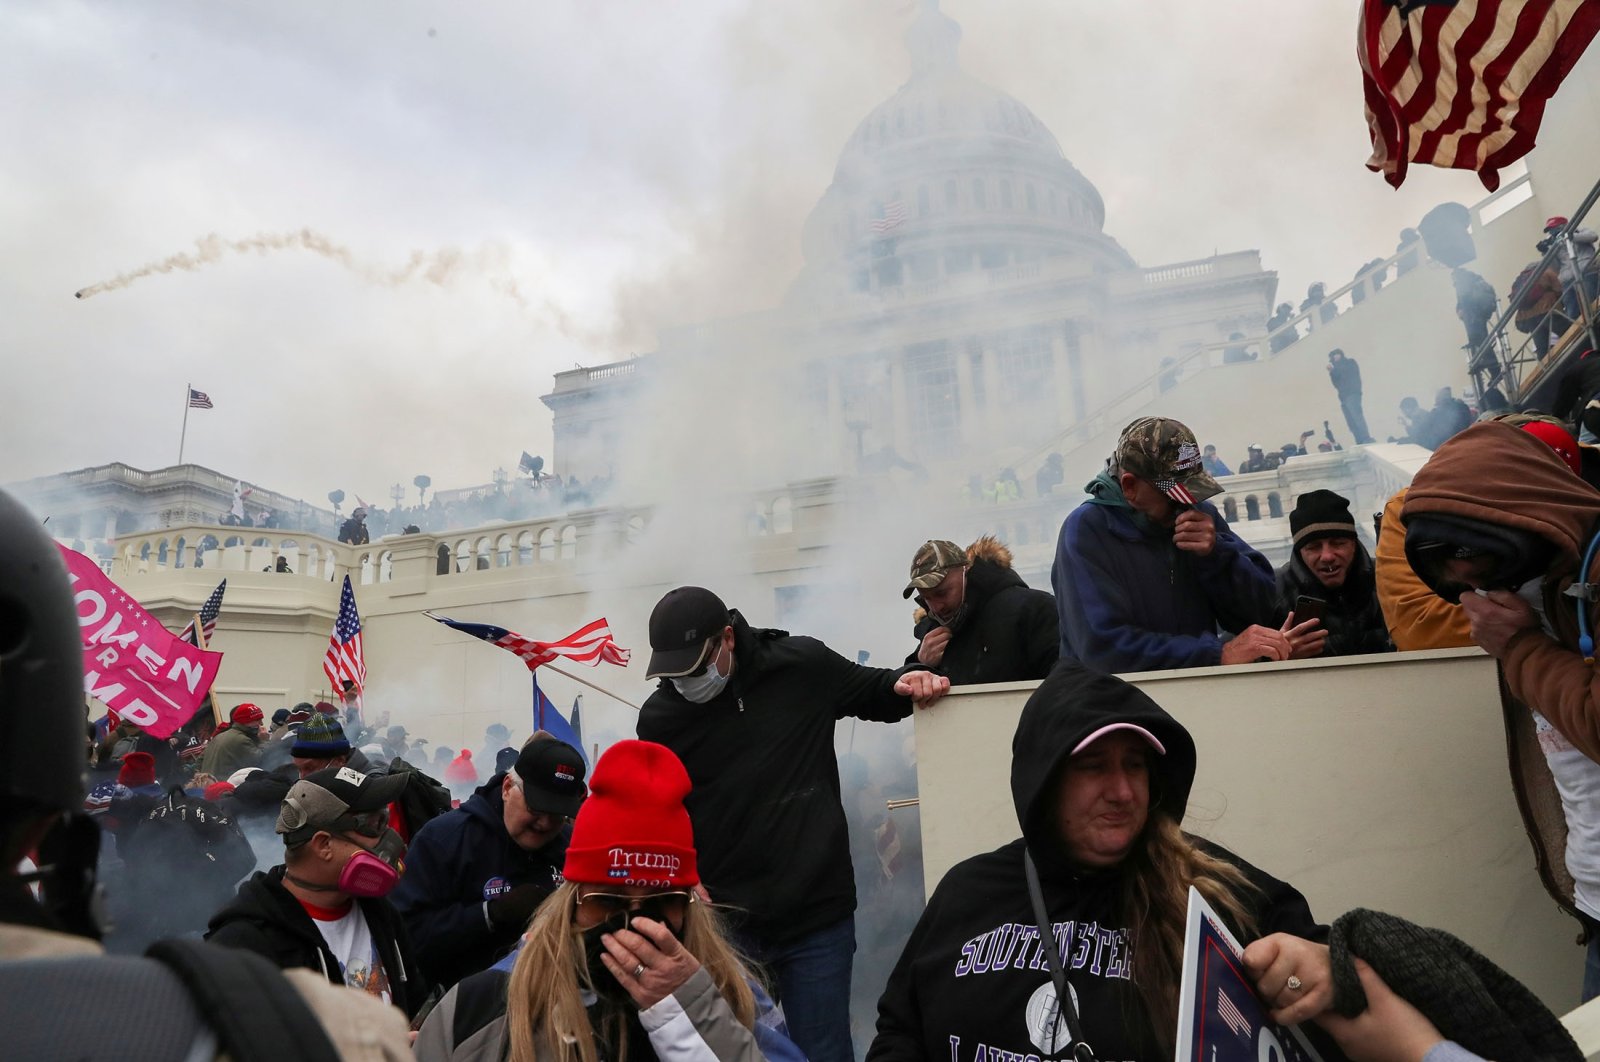 Supporters of U.S. President Donald Trump cover their faces to protect from tear gas during a clash with police officers in front of the U.S. Capitol Building in Washington, U.S., Jan. 6, 2021. (Reuters Photo)